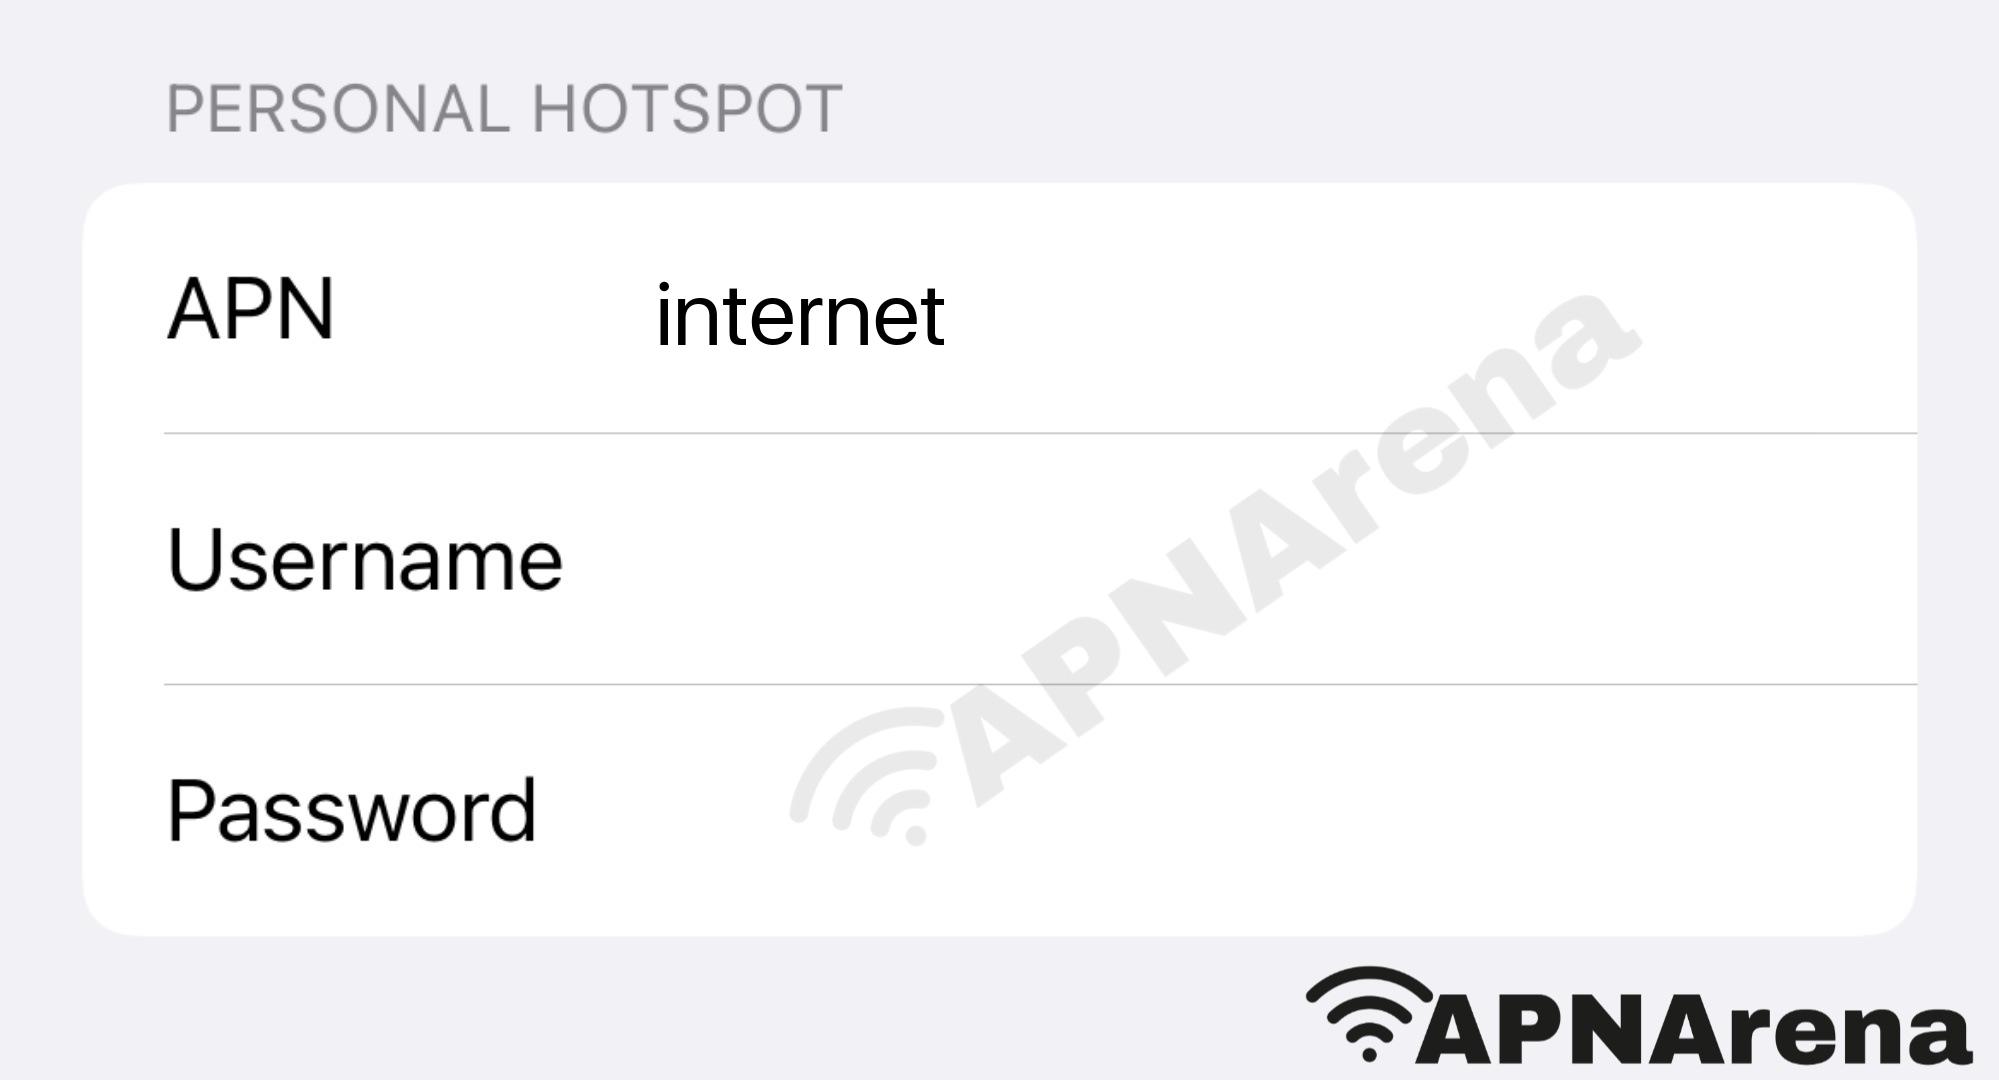 Feelsafe Wireless Personal Hotspot Settings for iPhone